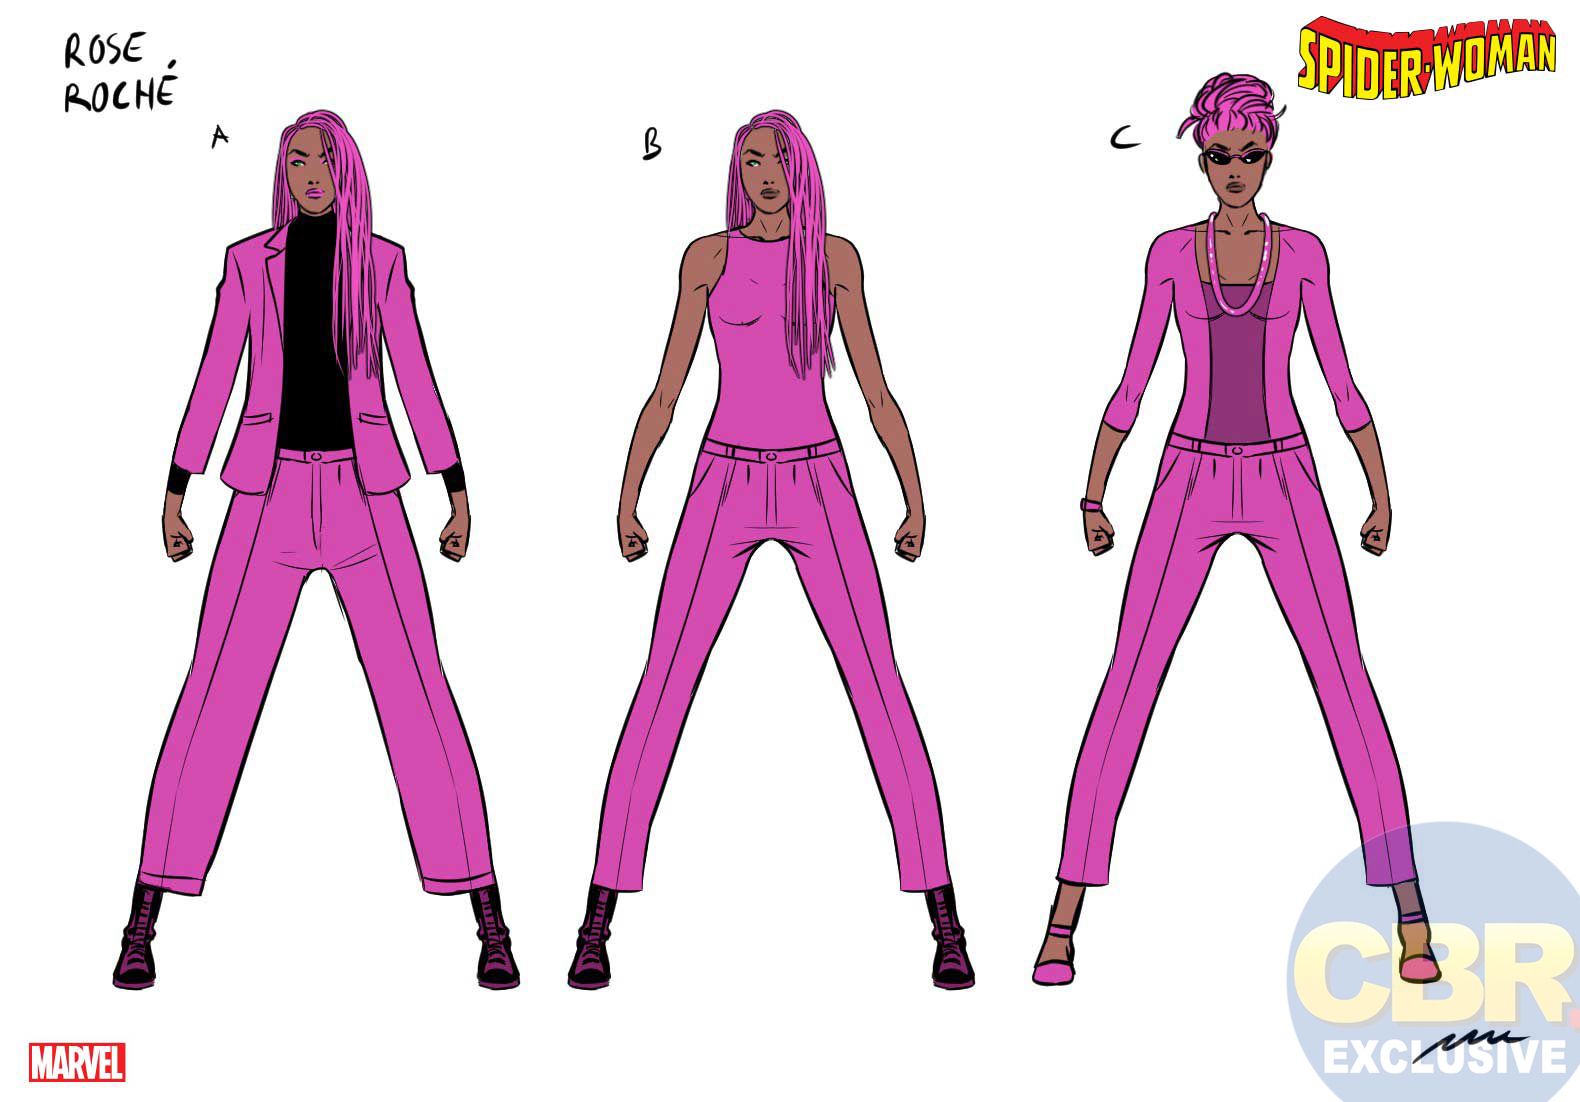 Spider-Woman #14 character designs for Rose Roche